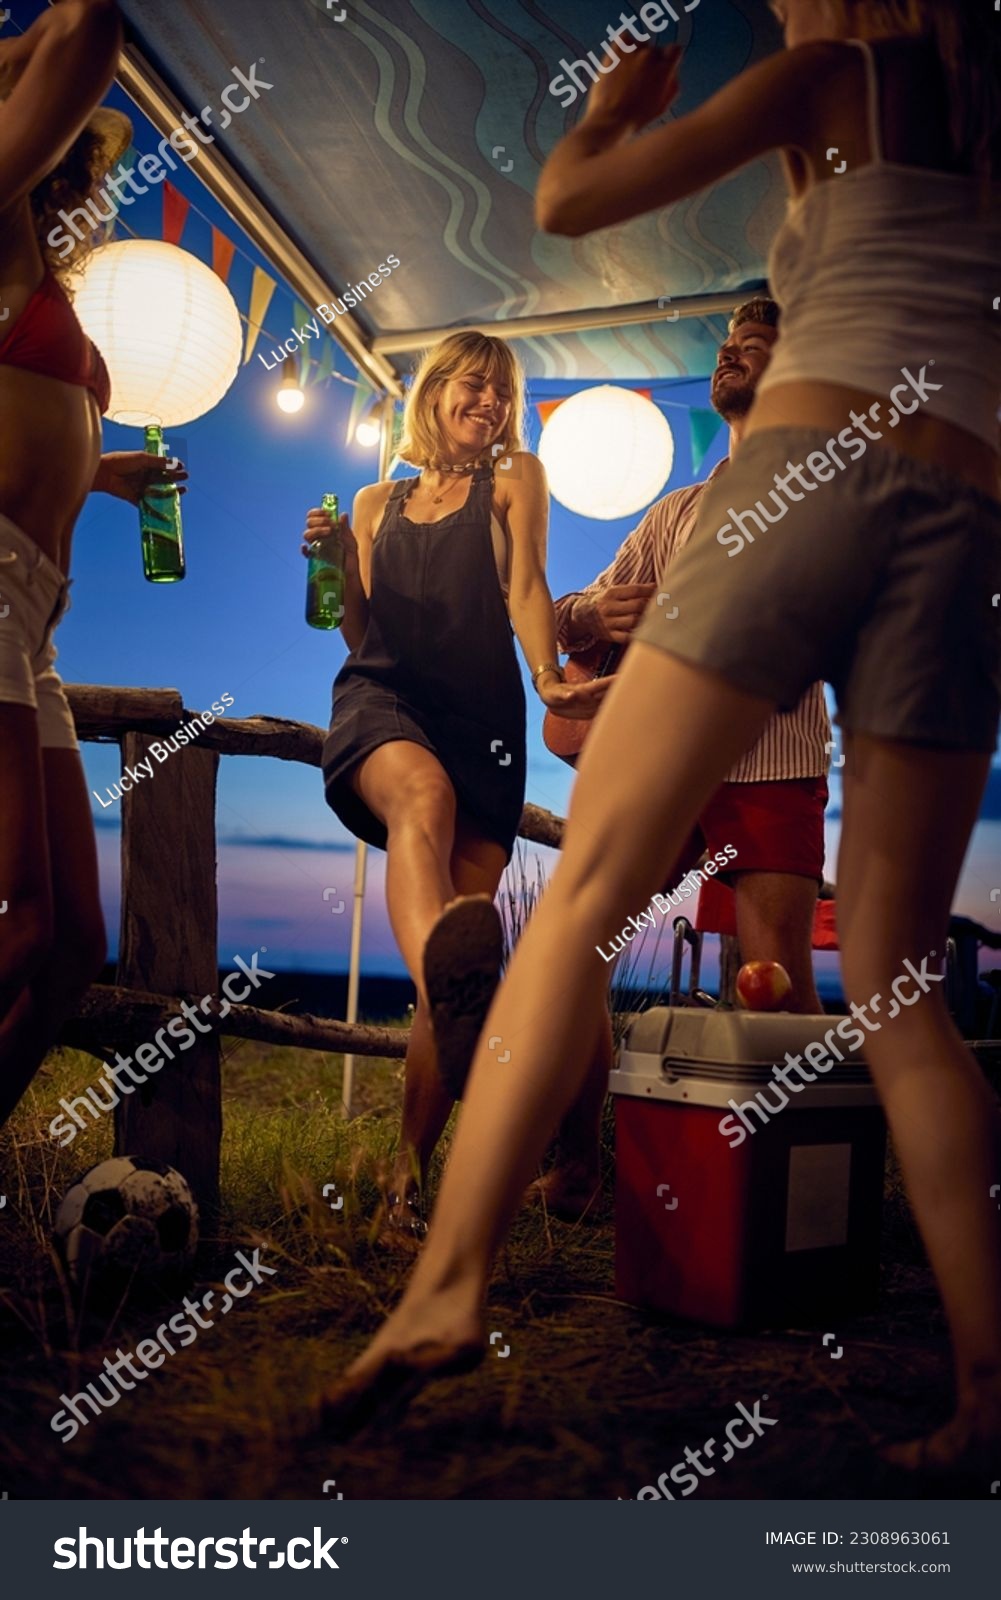 Young people celebrating, dancing and having fun outdoors in camp. Summertime sunset. Travel, weekend, togetherness, lifestyle concept. #2308963061